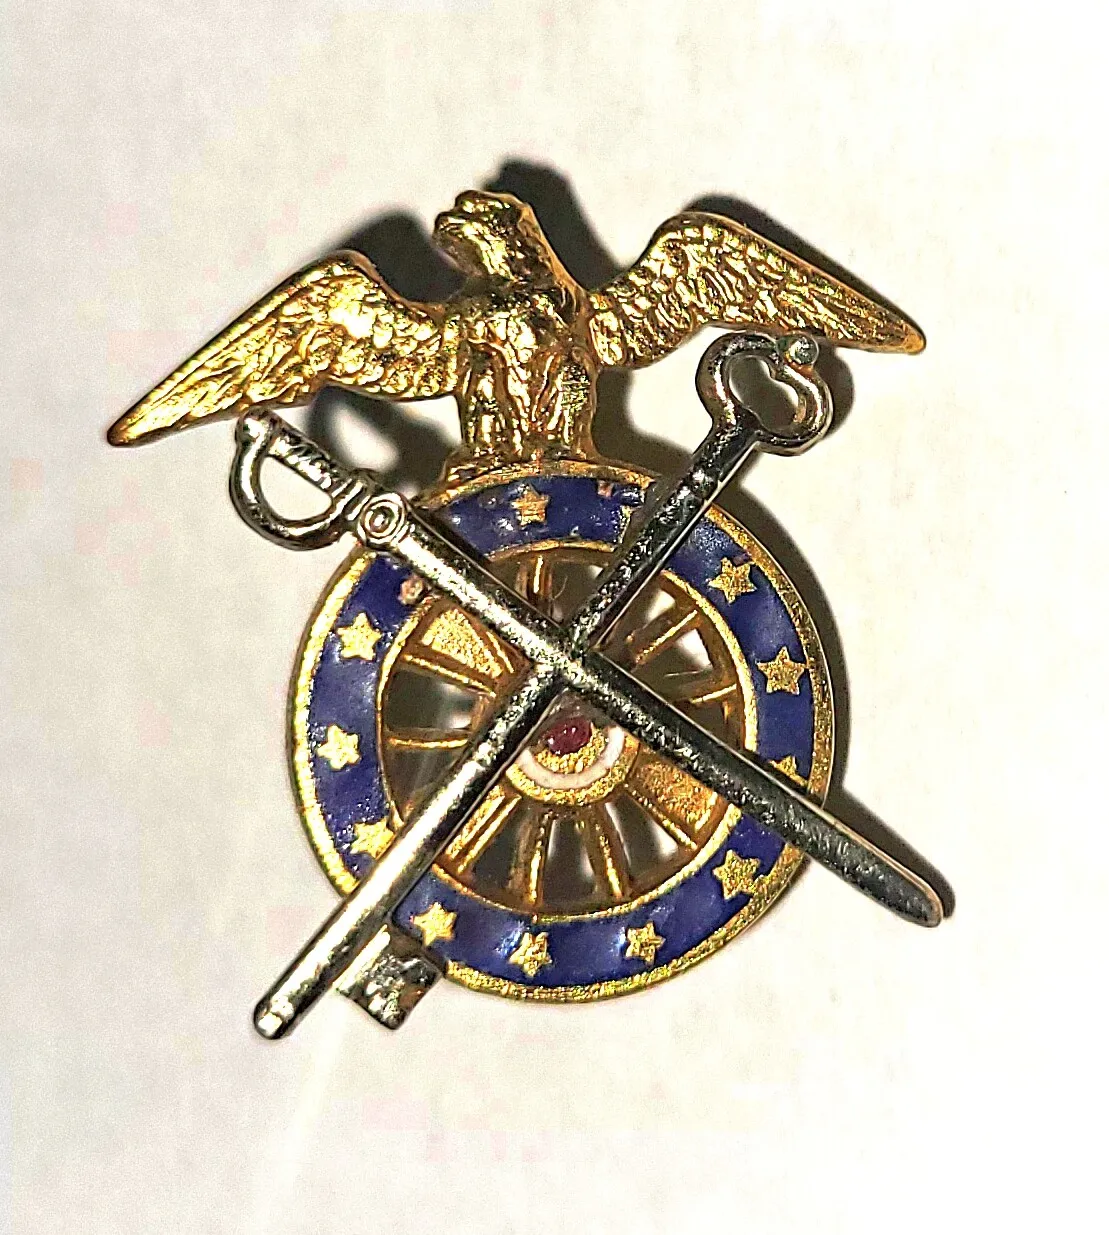 Primary image for Vintage US Army Quartermaster Insignia Badge 